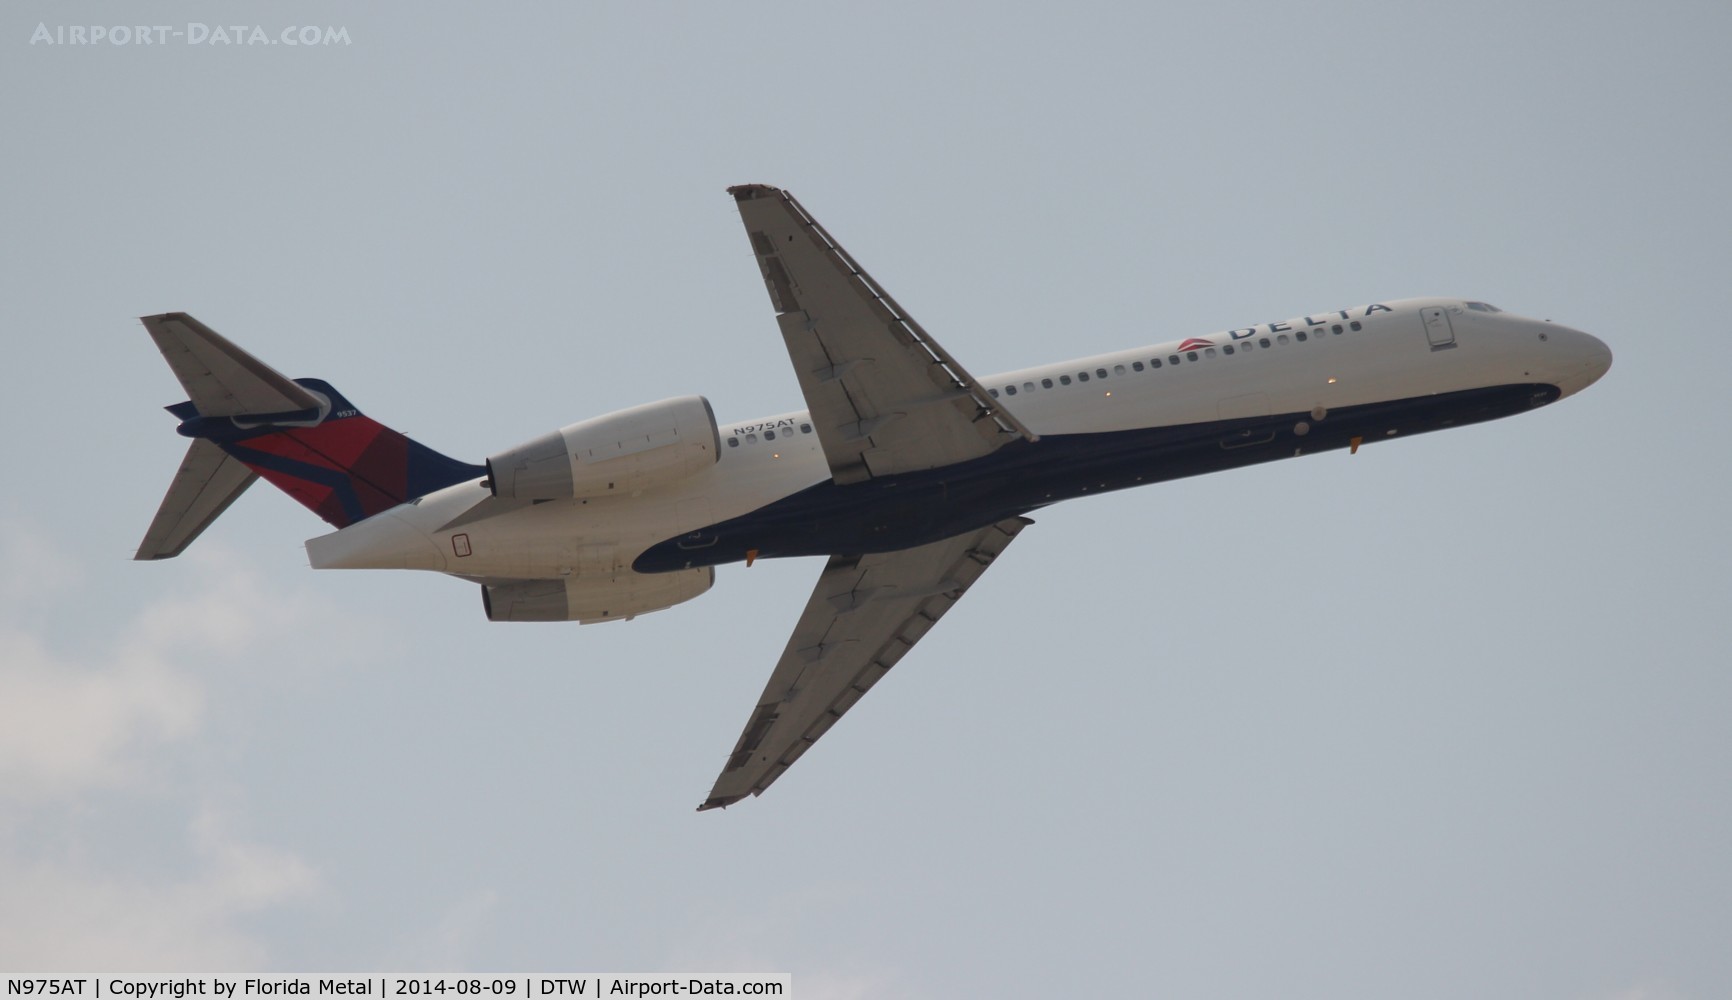 N975AT, 2002 Boeing 717-200 C/N 55035, Ex Air Tran 717 now with Delta